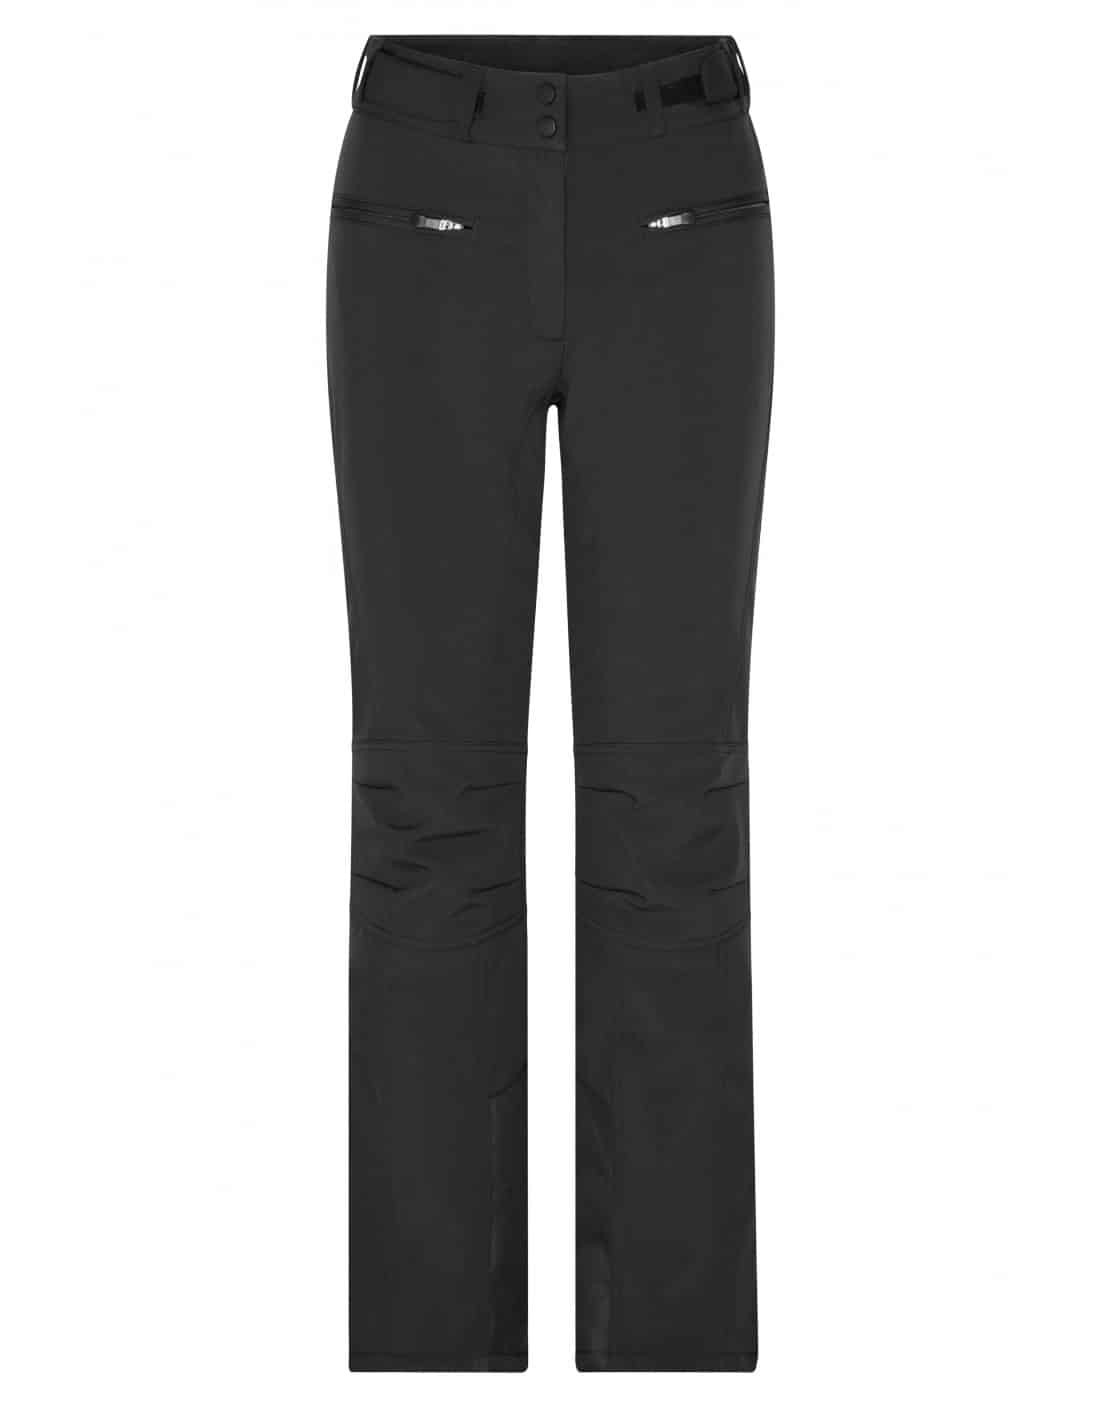 Buy No Nasties Charcoal Black Knit Flared Winter Pants For Women